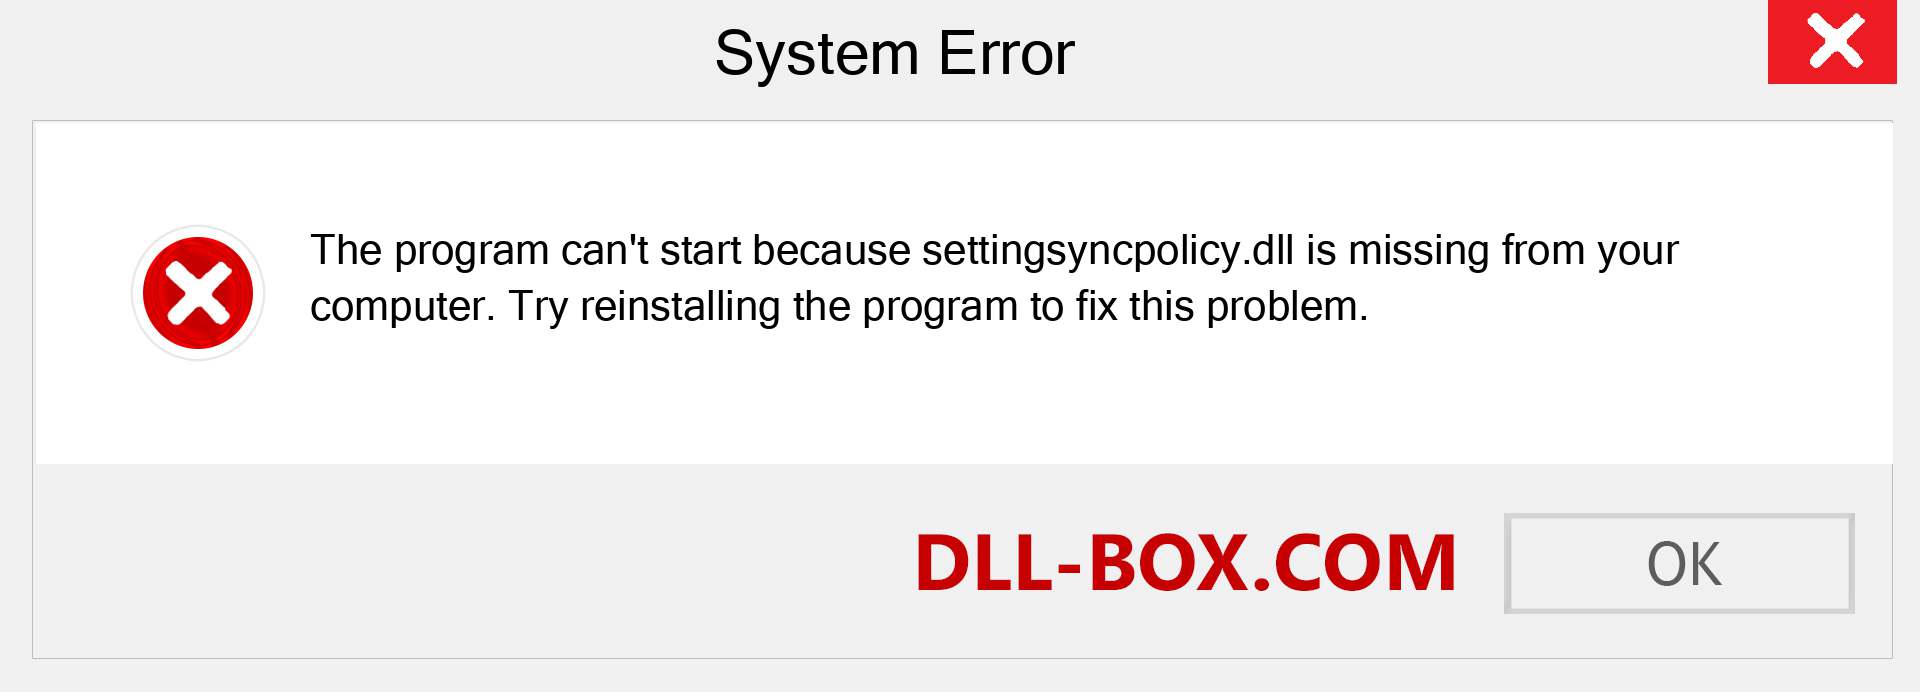  settingsyncpolicy.dll file is missing?. Download for Windows 7, 8, 10 - Fix  settingsyncpolicy dll Missing Error on Windows, photos, images